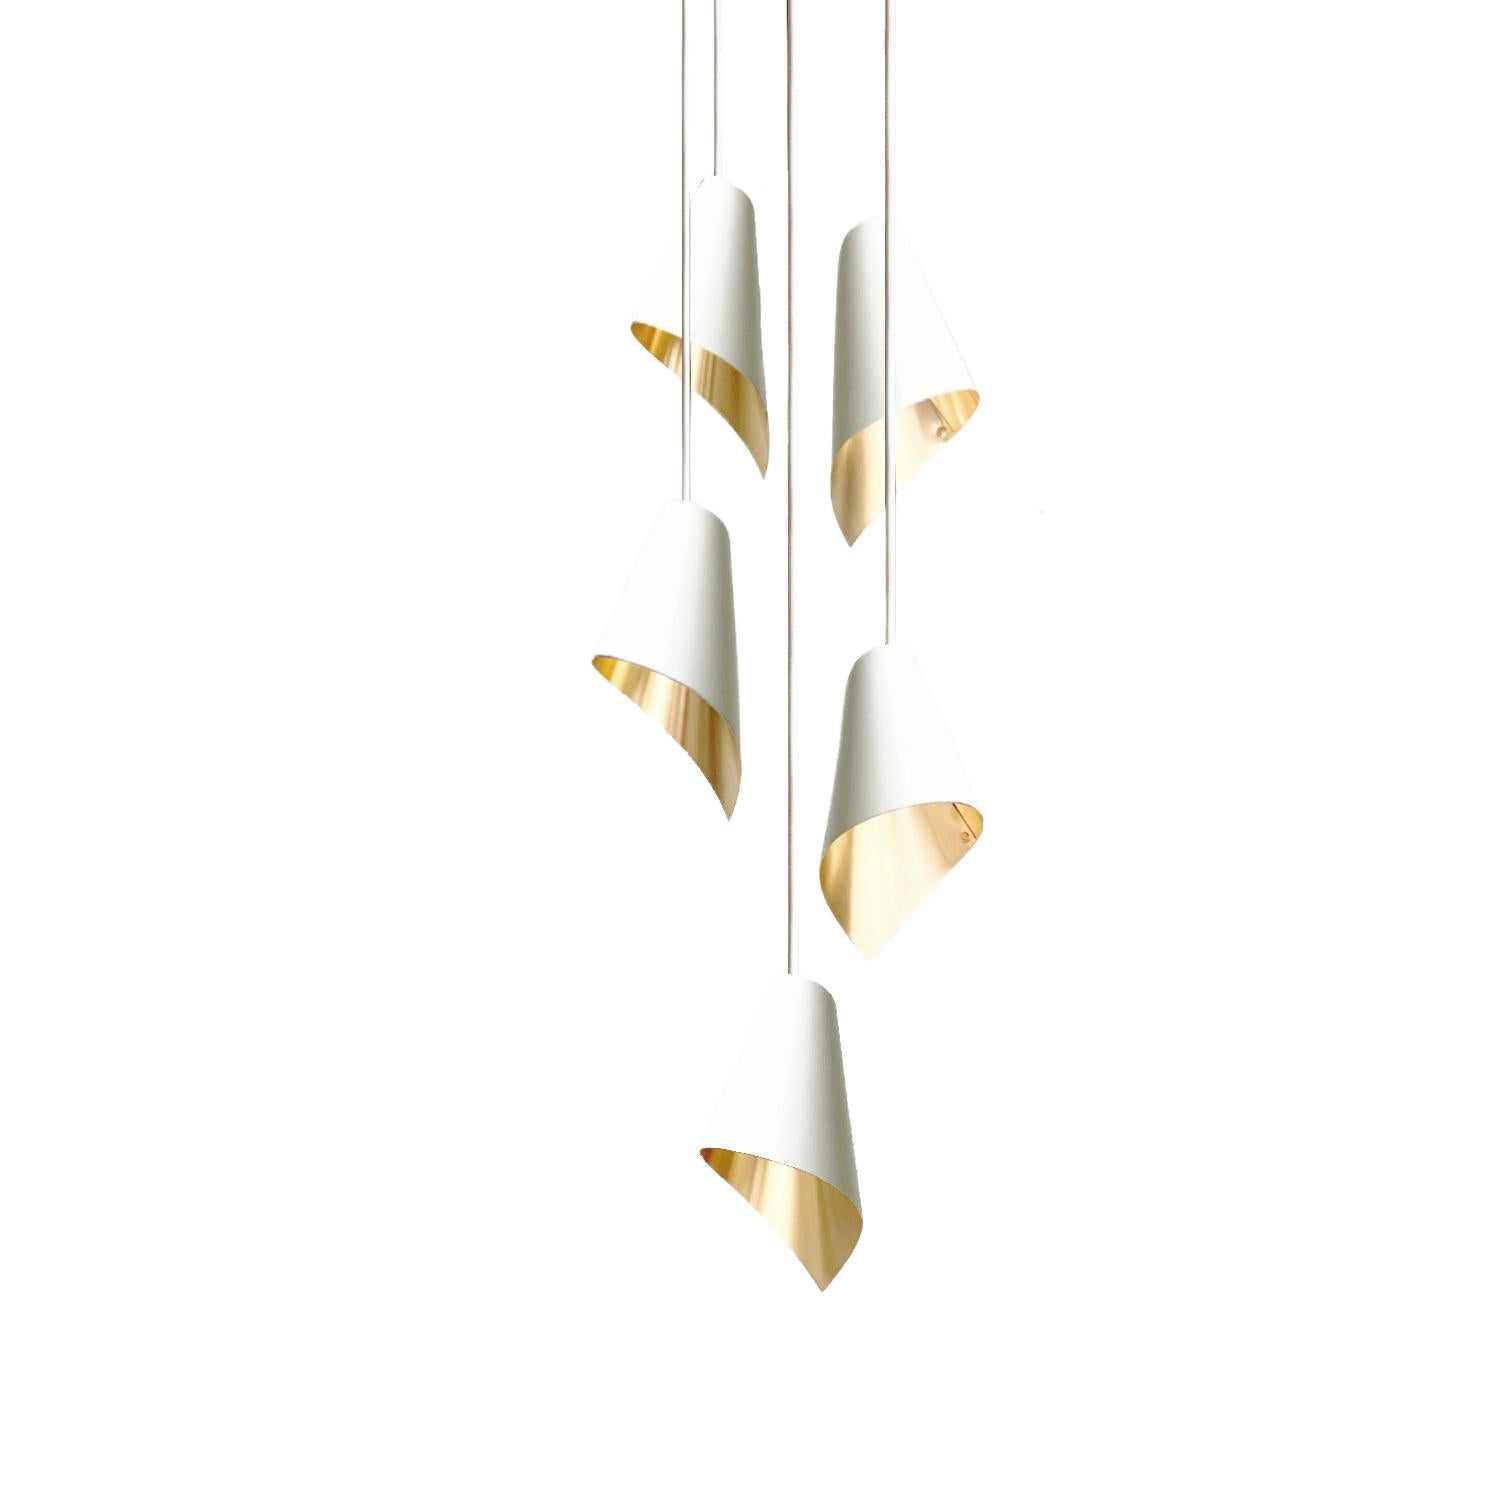 British ARC 5 Modern Pendant Light Cascade in White and Brushed Brass, Made in Britain For Sale